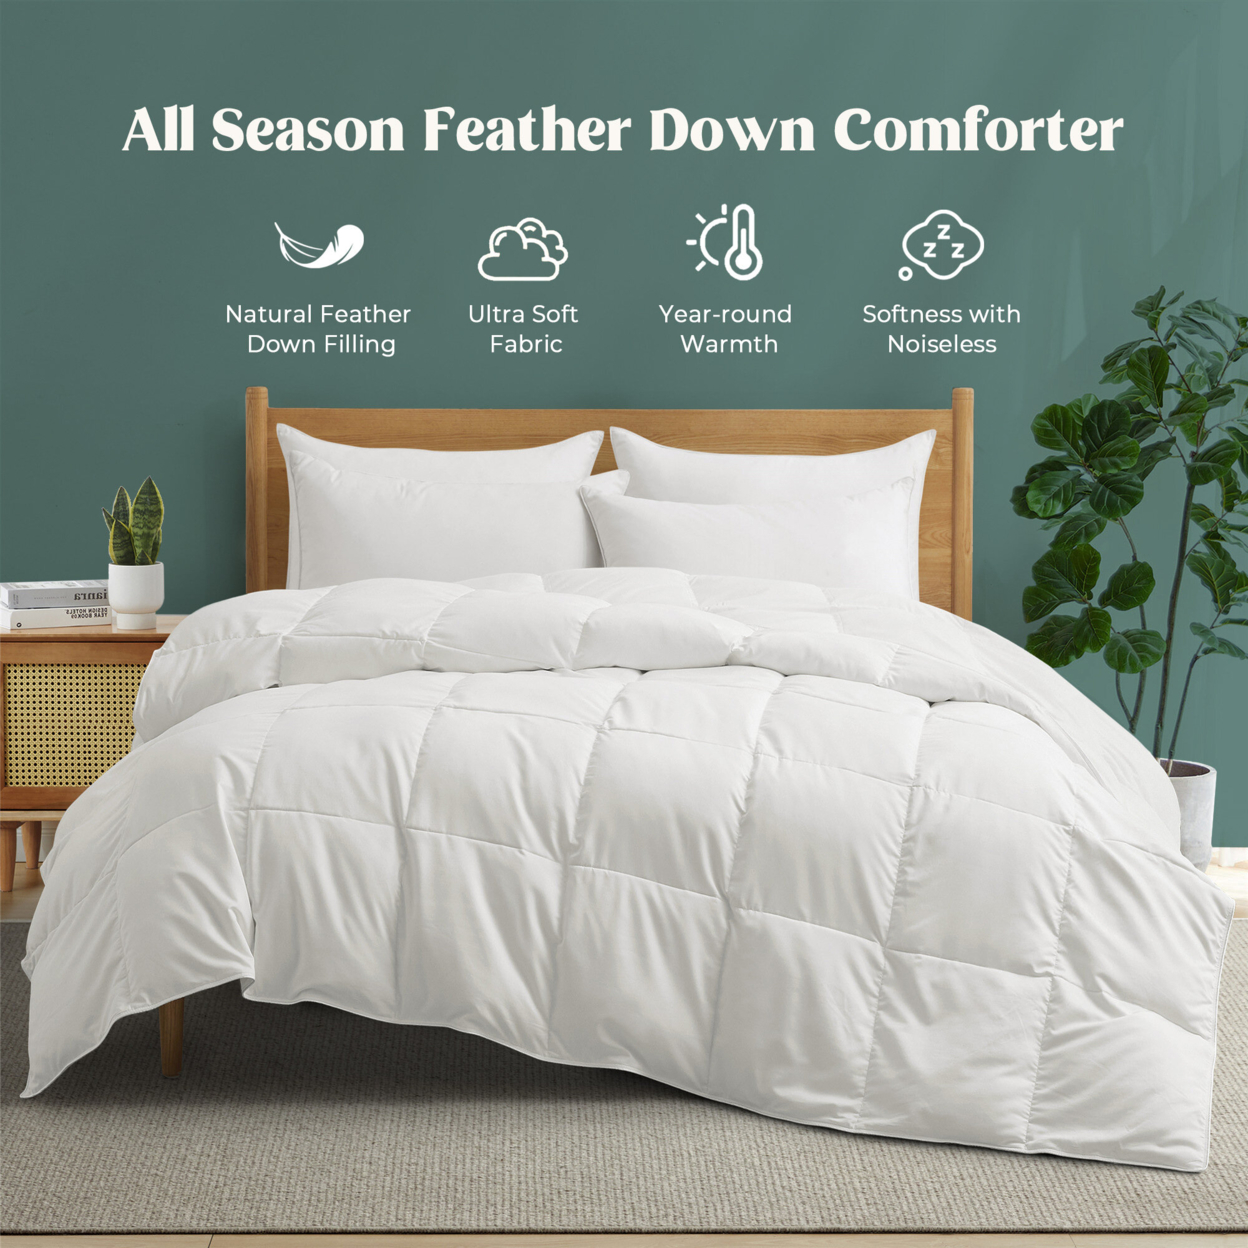 White Goose Feather Fiber And Down Comforter-Lightweight&Medium Weight, Sleep Soundly With Noiseless - Medium Weight, Twin